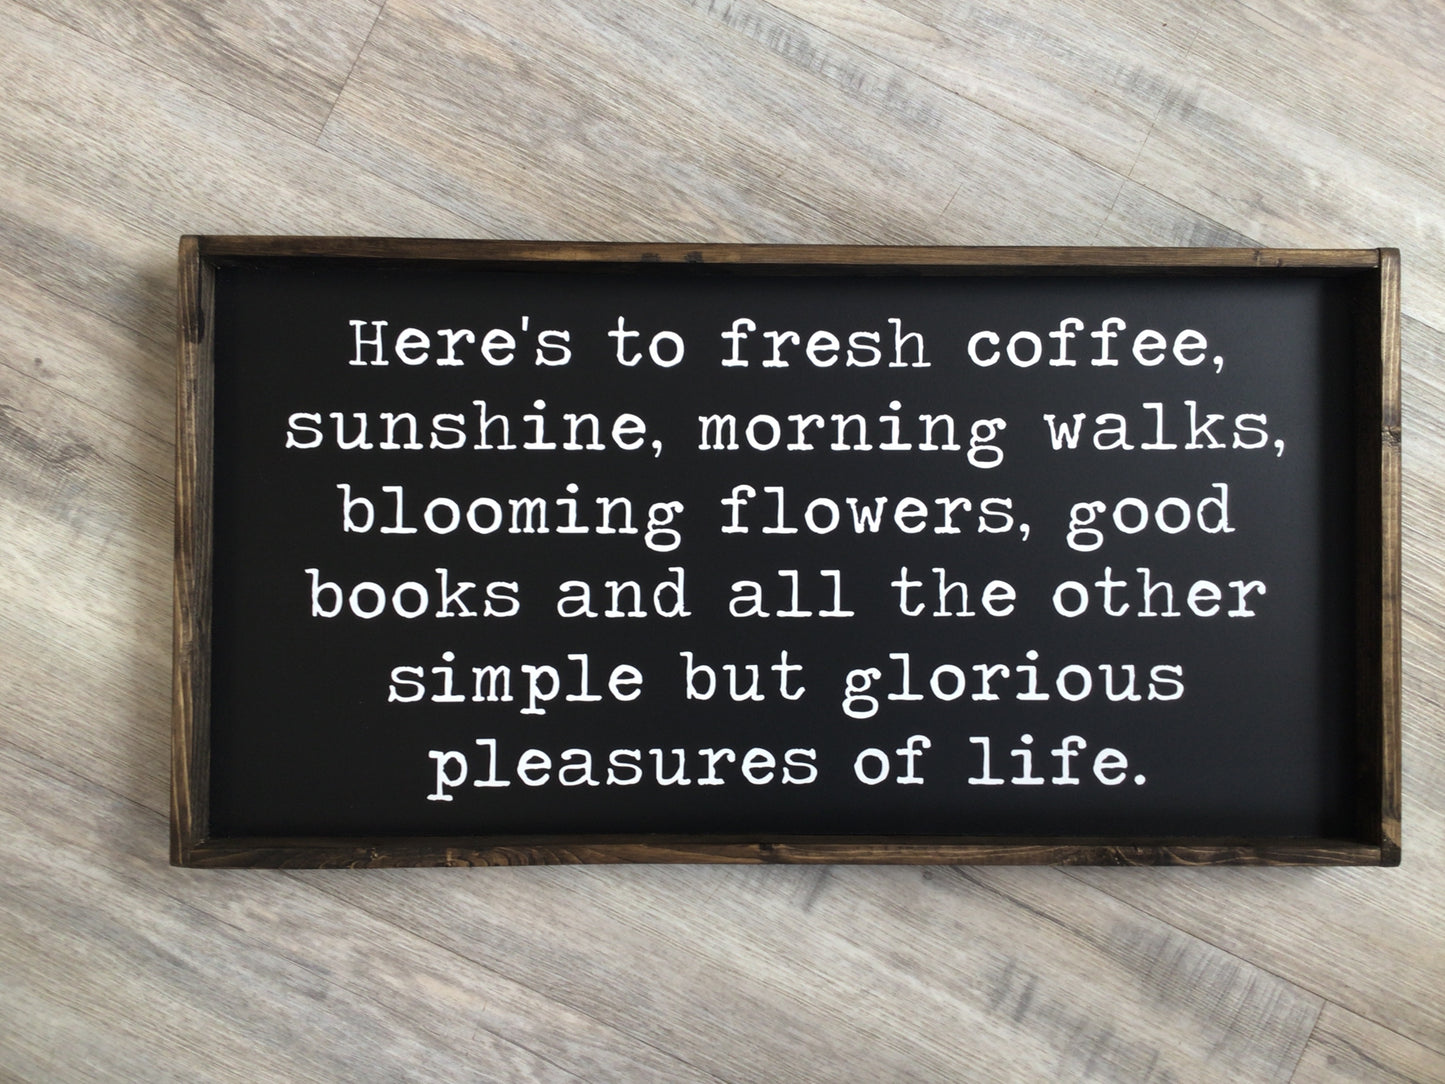 FAS-05 “Here’s to fresh coffee” Sign